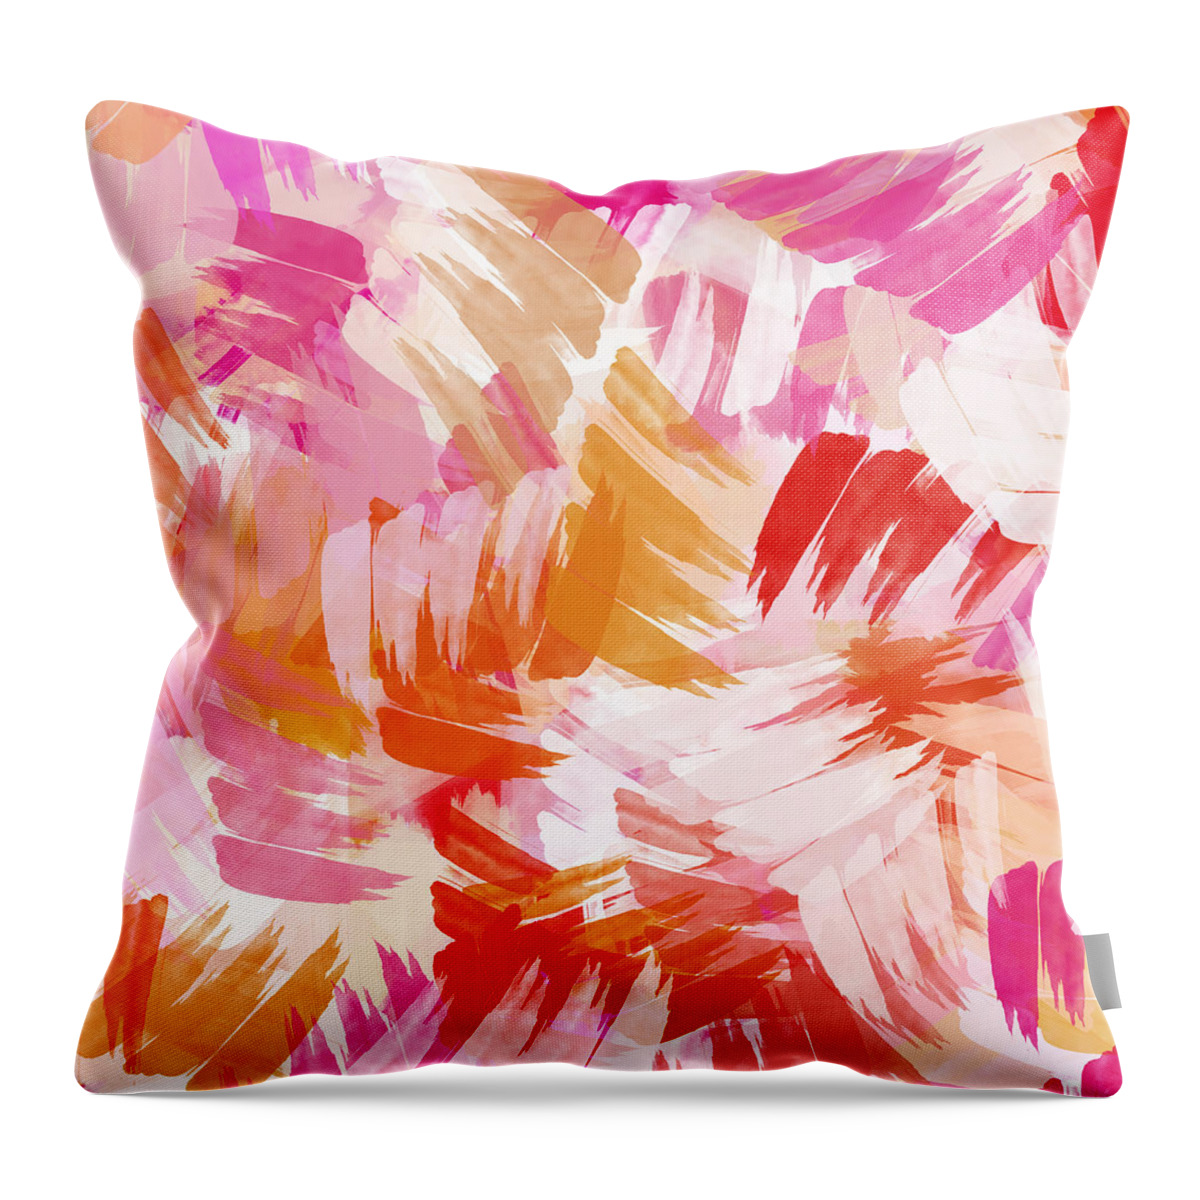 Abstract Throw Pillow featuring the mixed media Abstract Paint Pattern by Christina Rollo